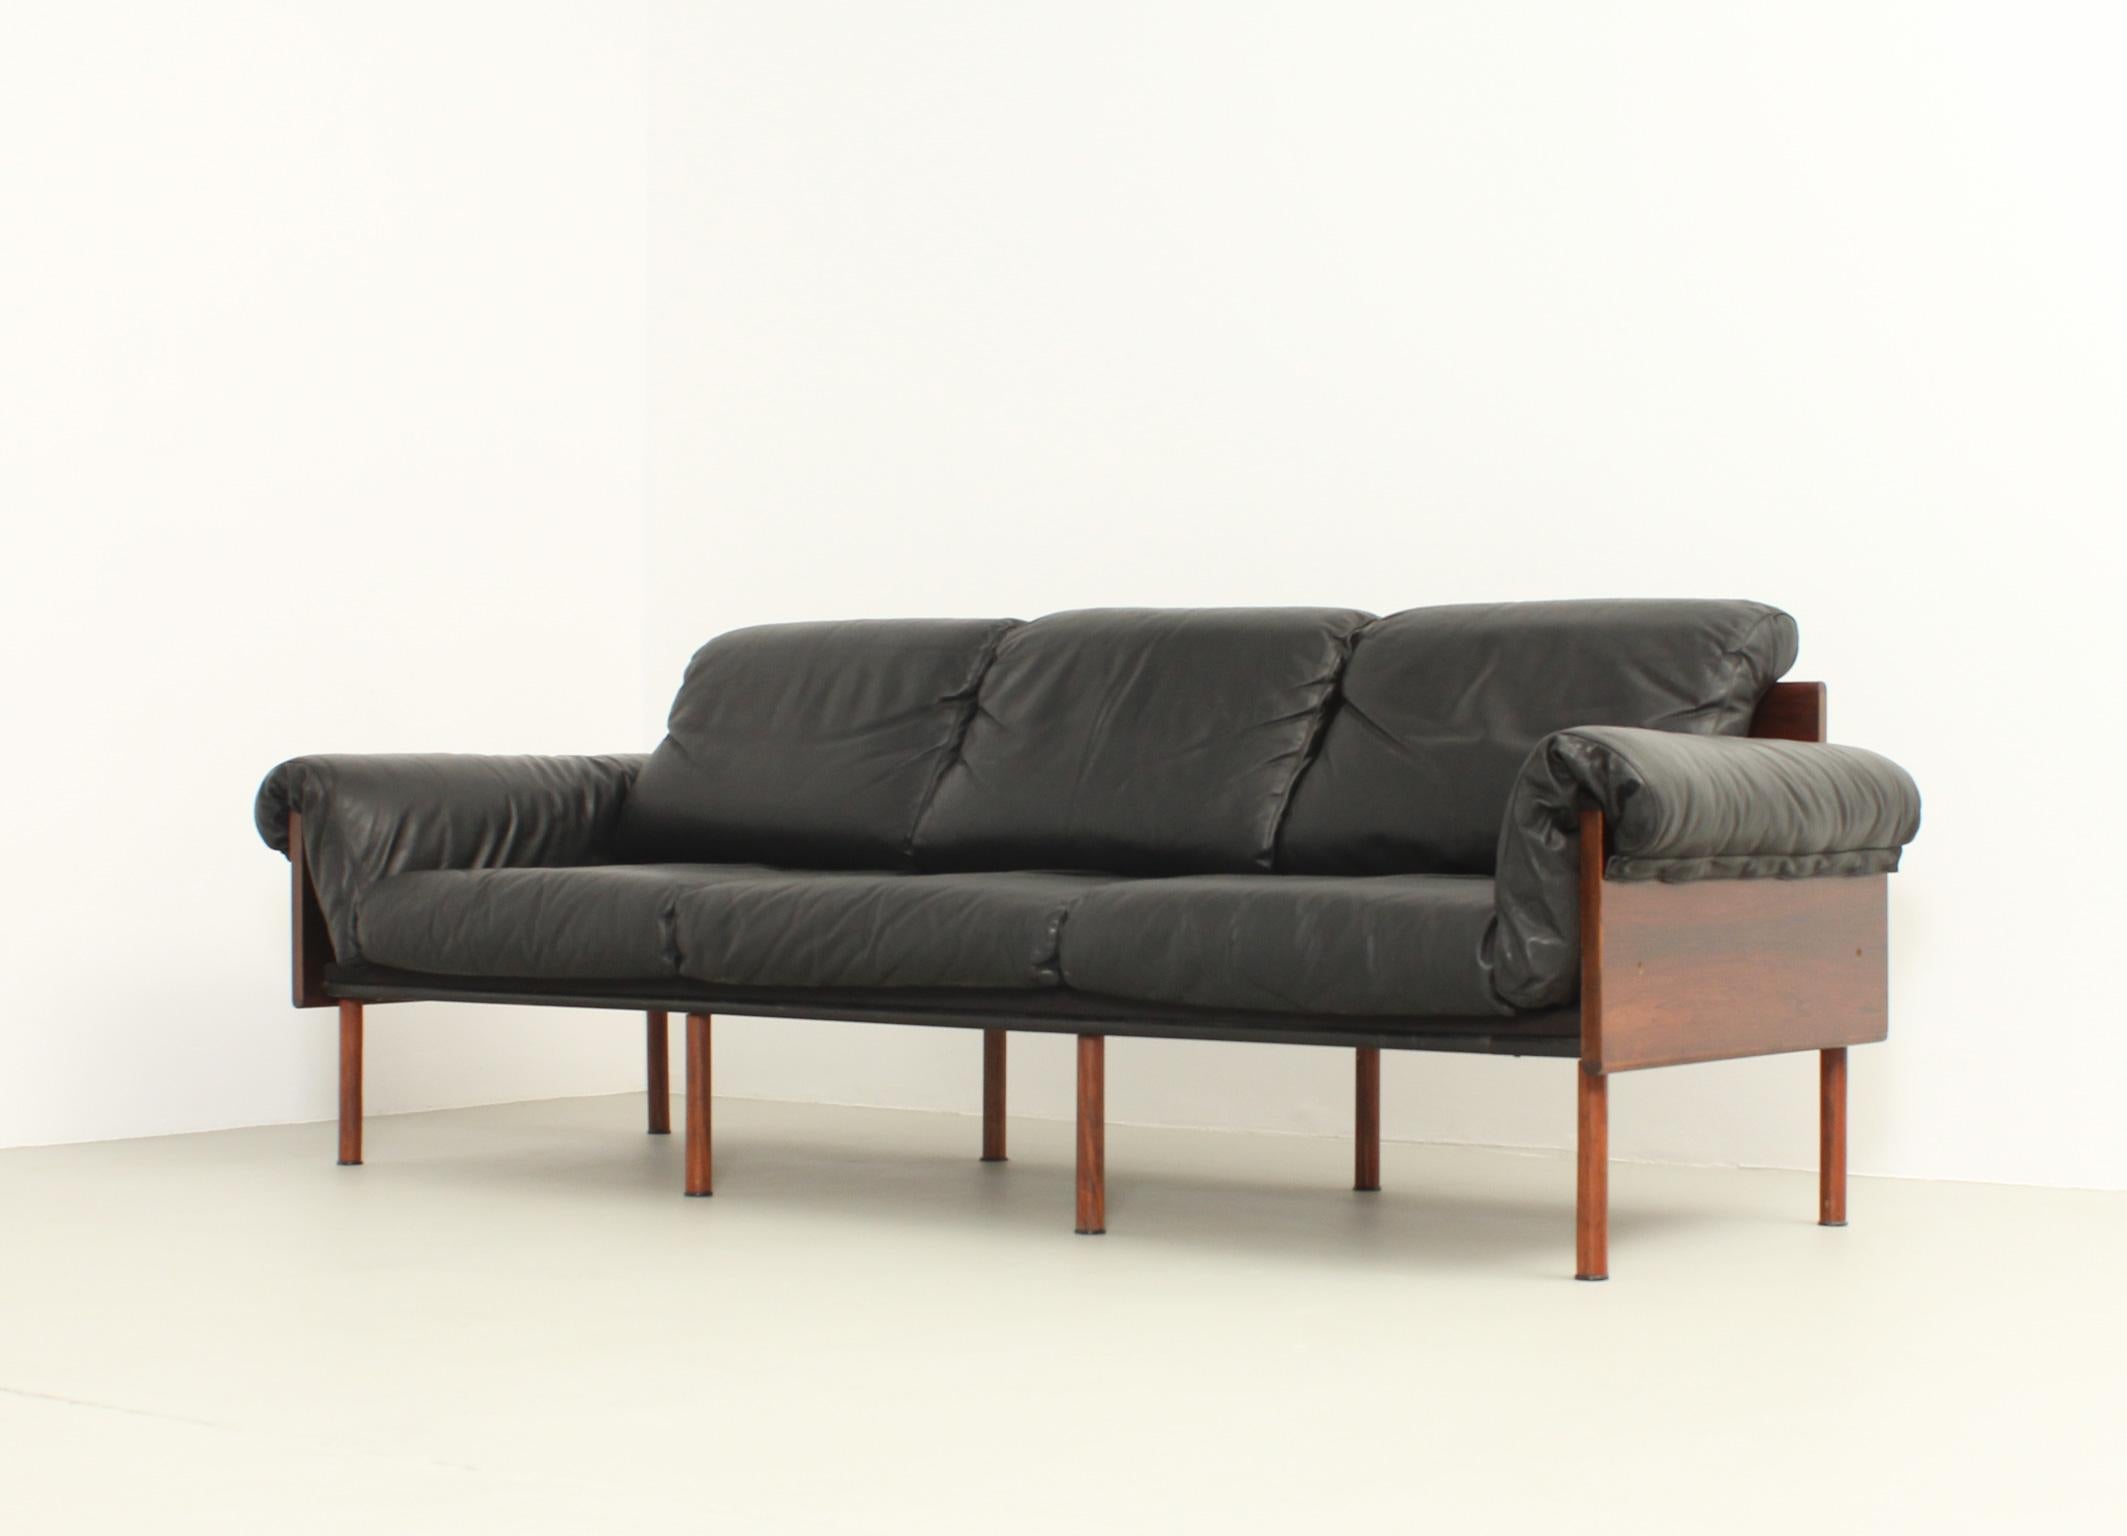 Sofa Ateljee designed in 1959 and produced in 1964 by finish designer Yrjö Kukkapuro for Haimi, Finland. Early edition in hardwood and wood legs with original black leather upholstery.